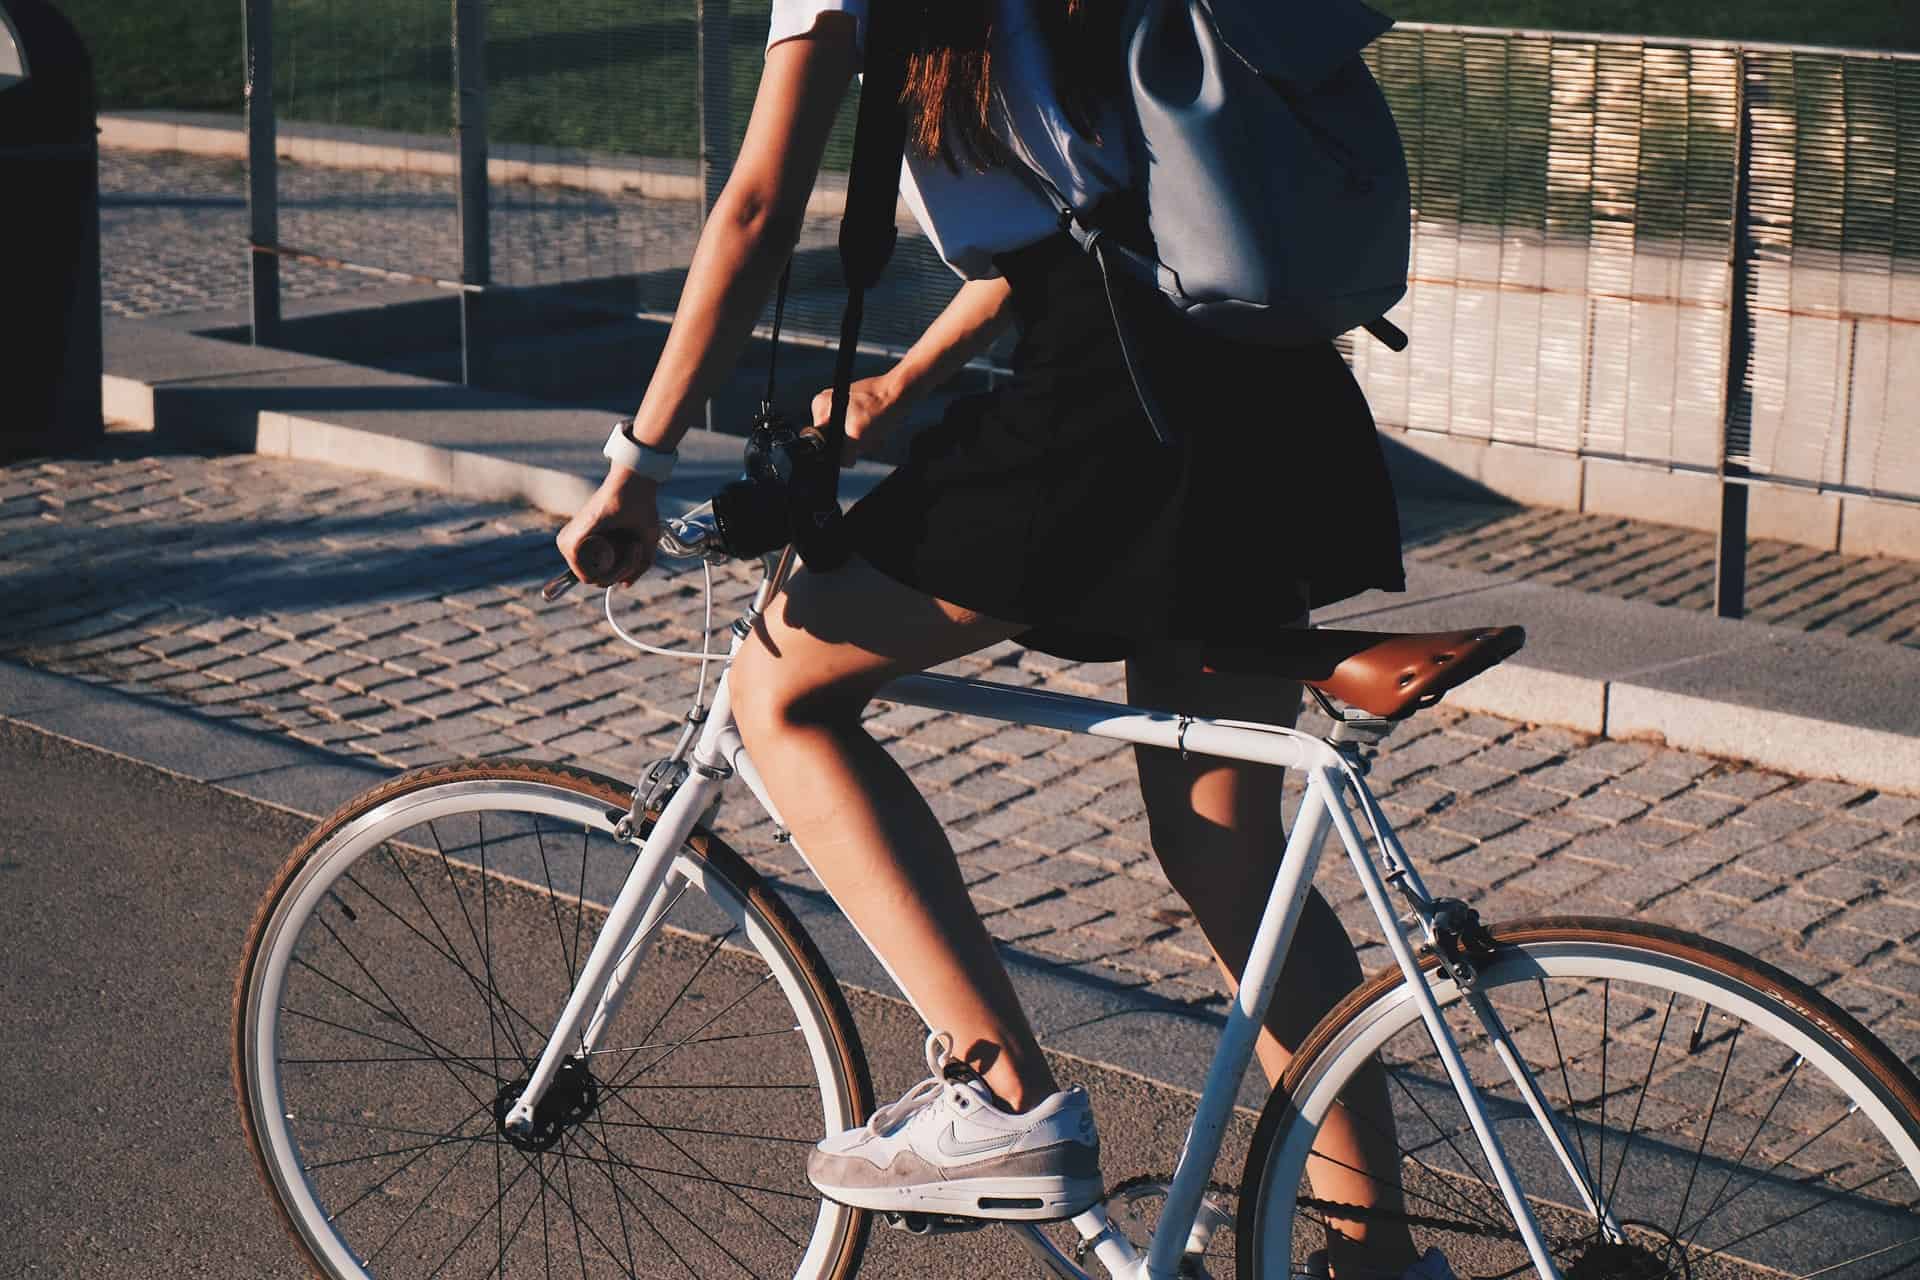 How do you fit a bike model into your lifestyle?